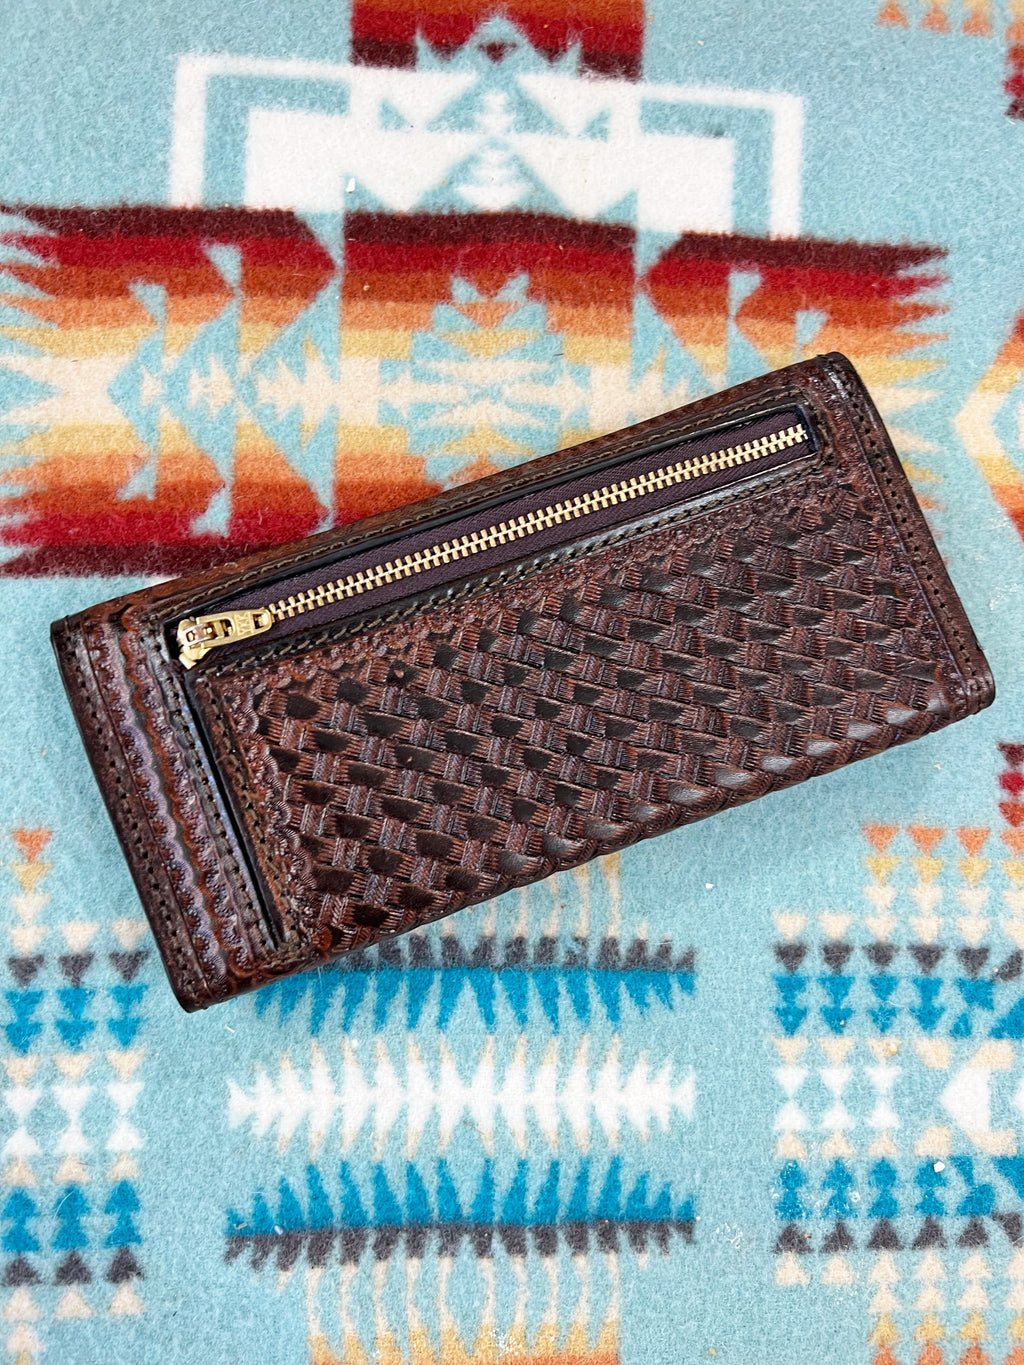 The Tooled Leather Wallet